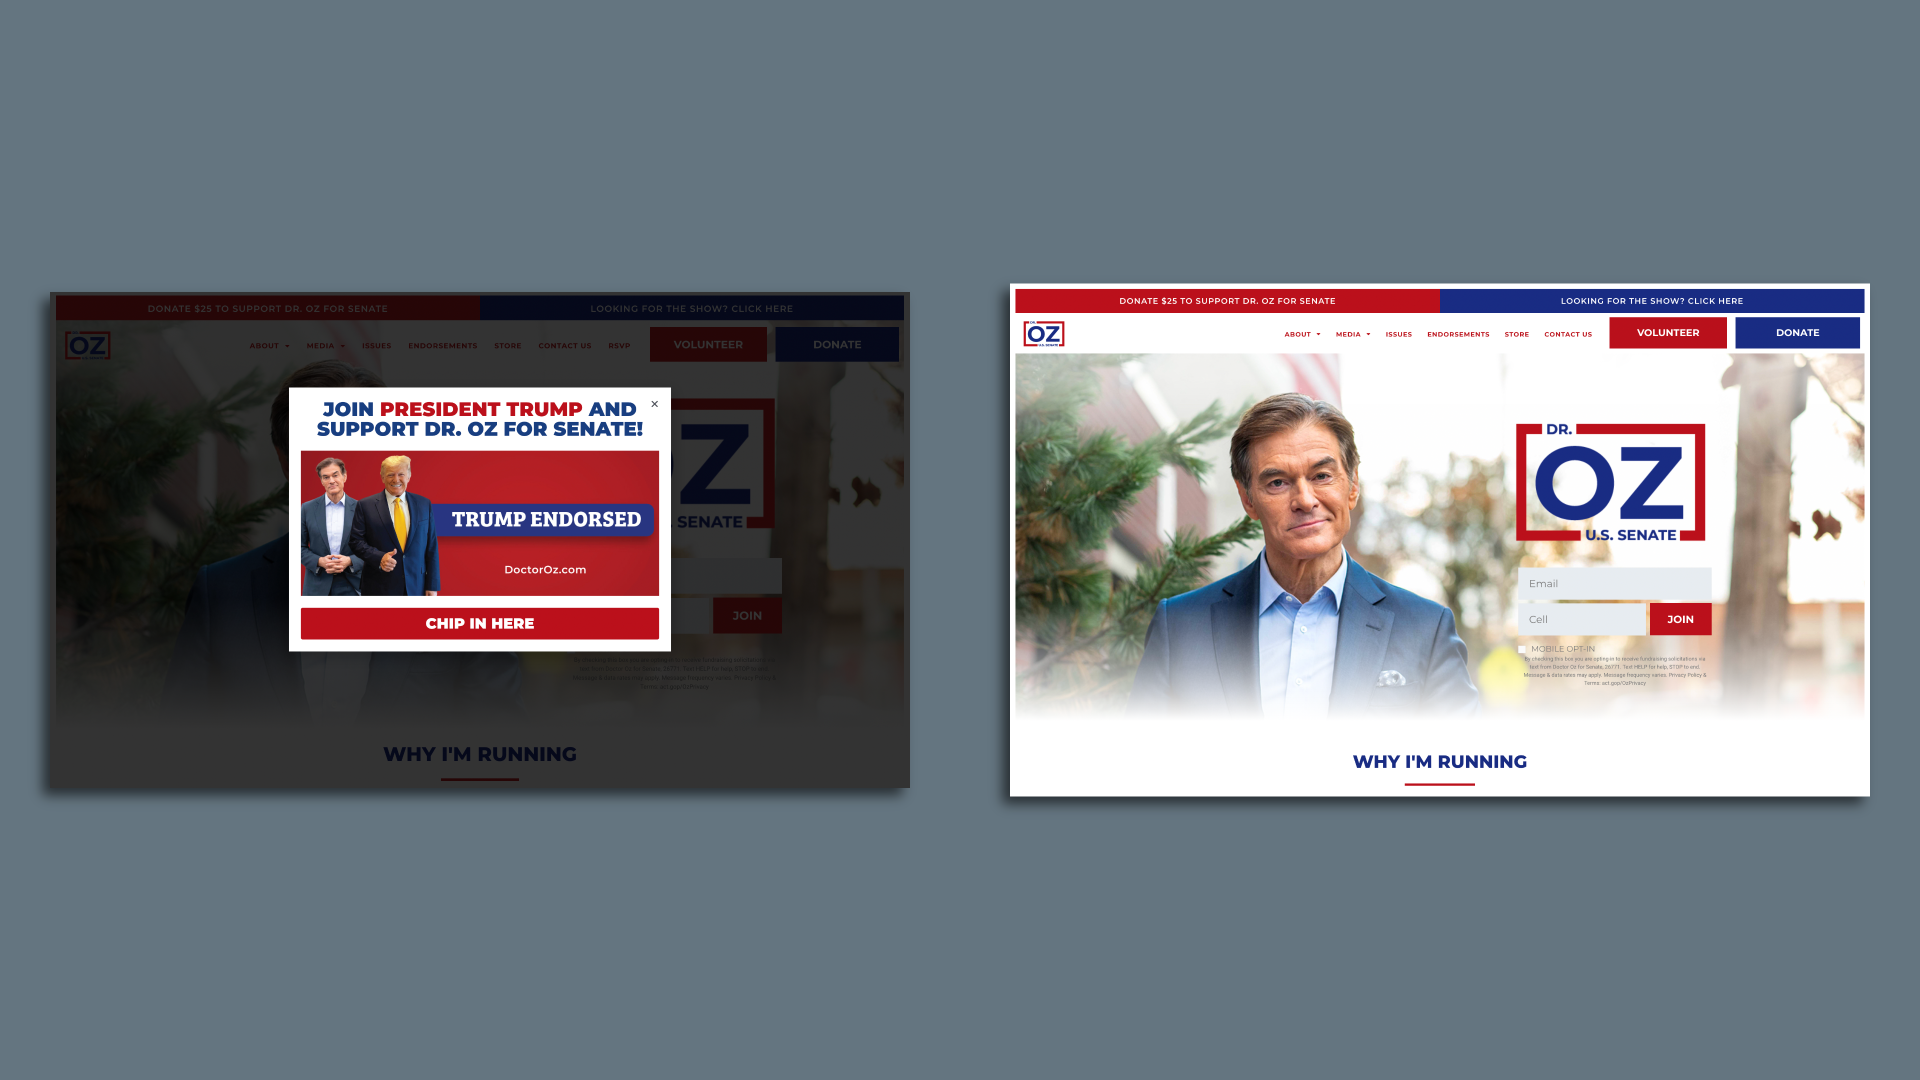 Oz's campaign website on April 15 (left) and June 18 (right). Source: Internet Archive.